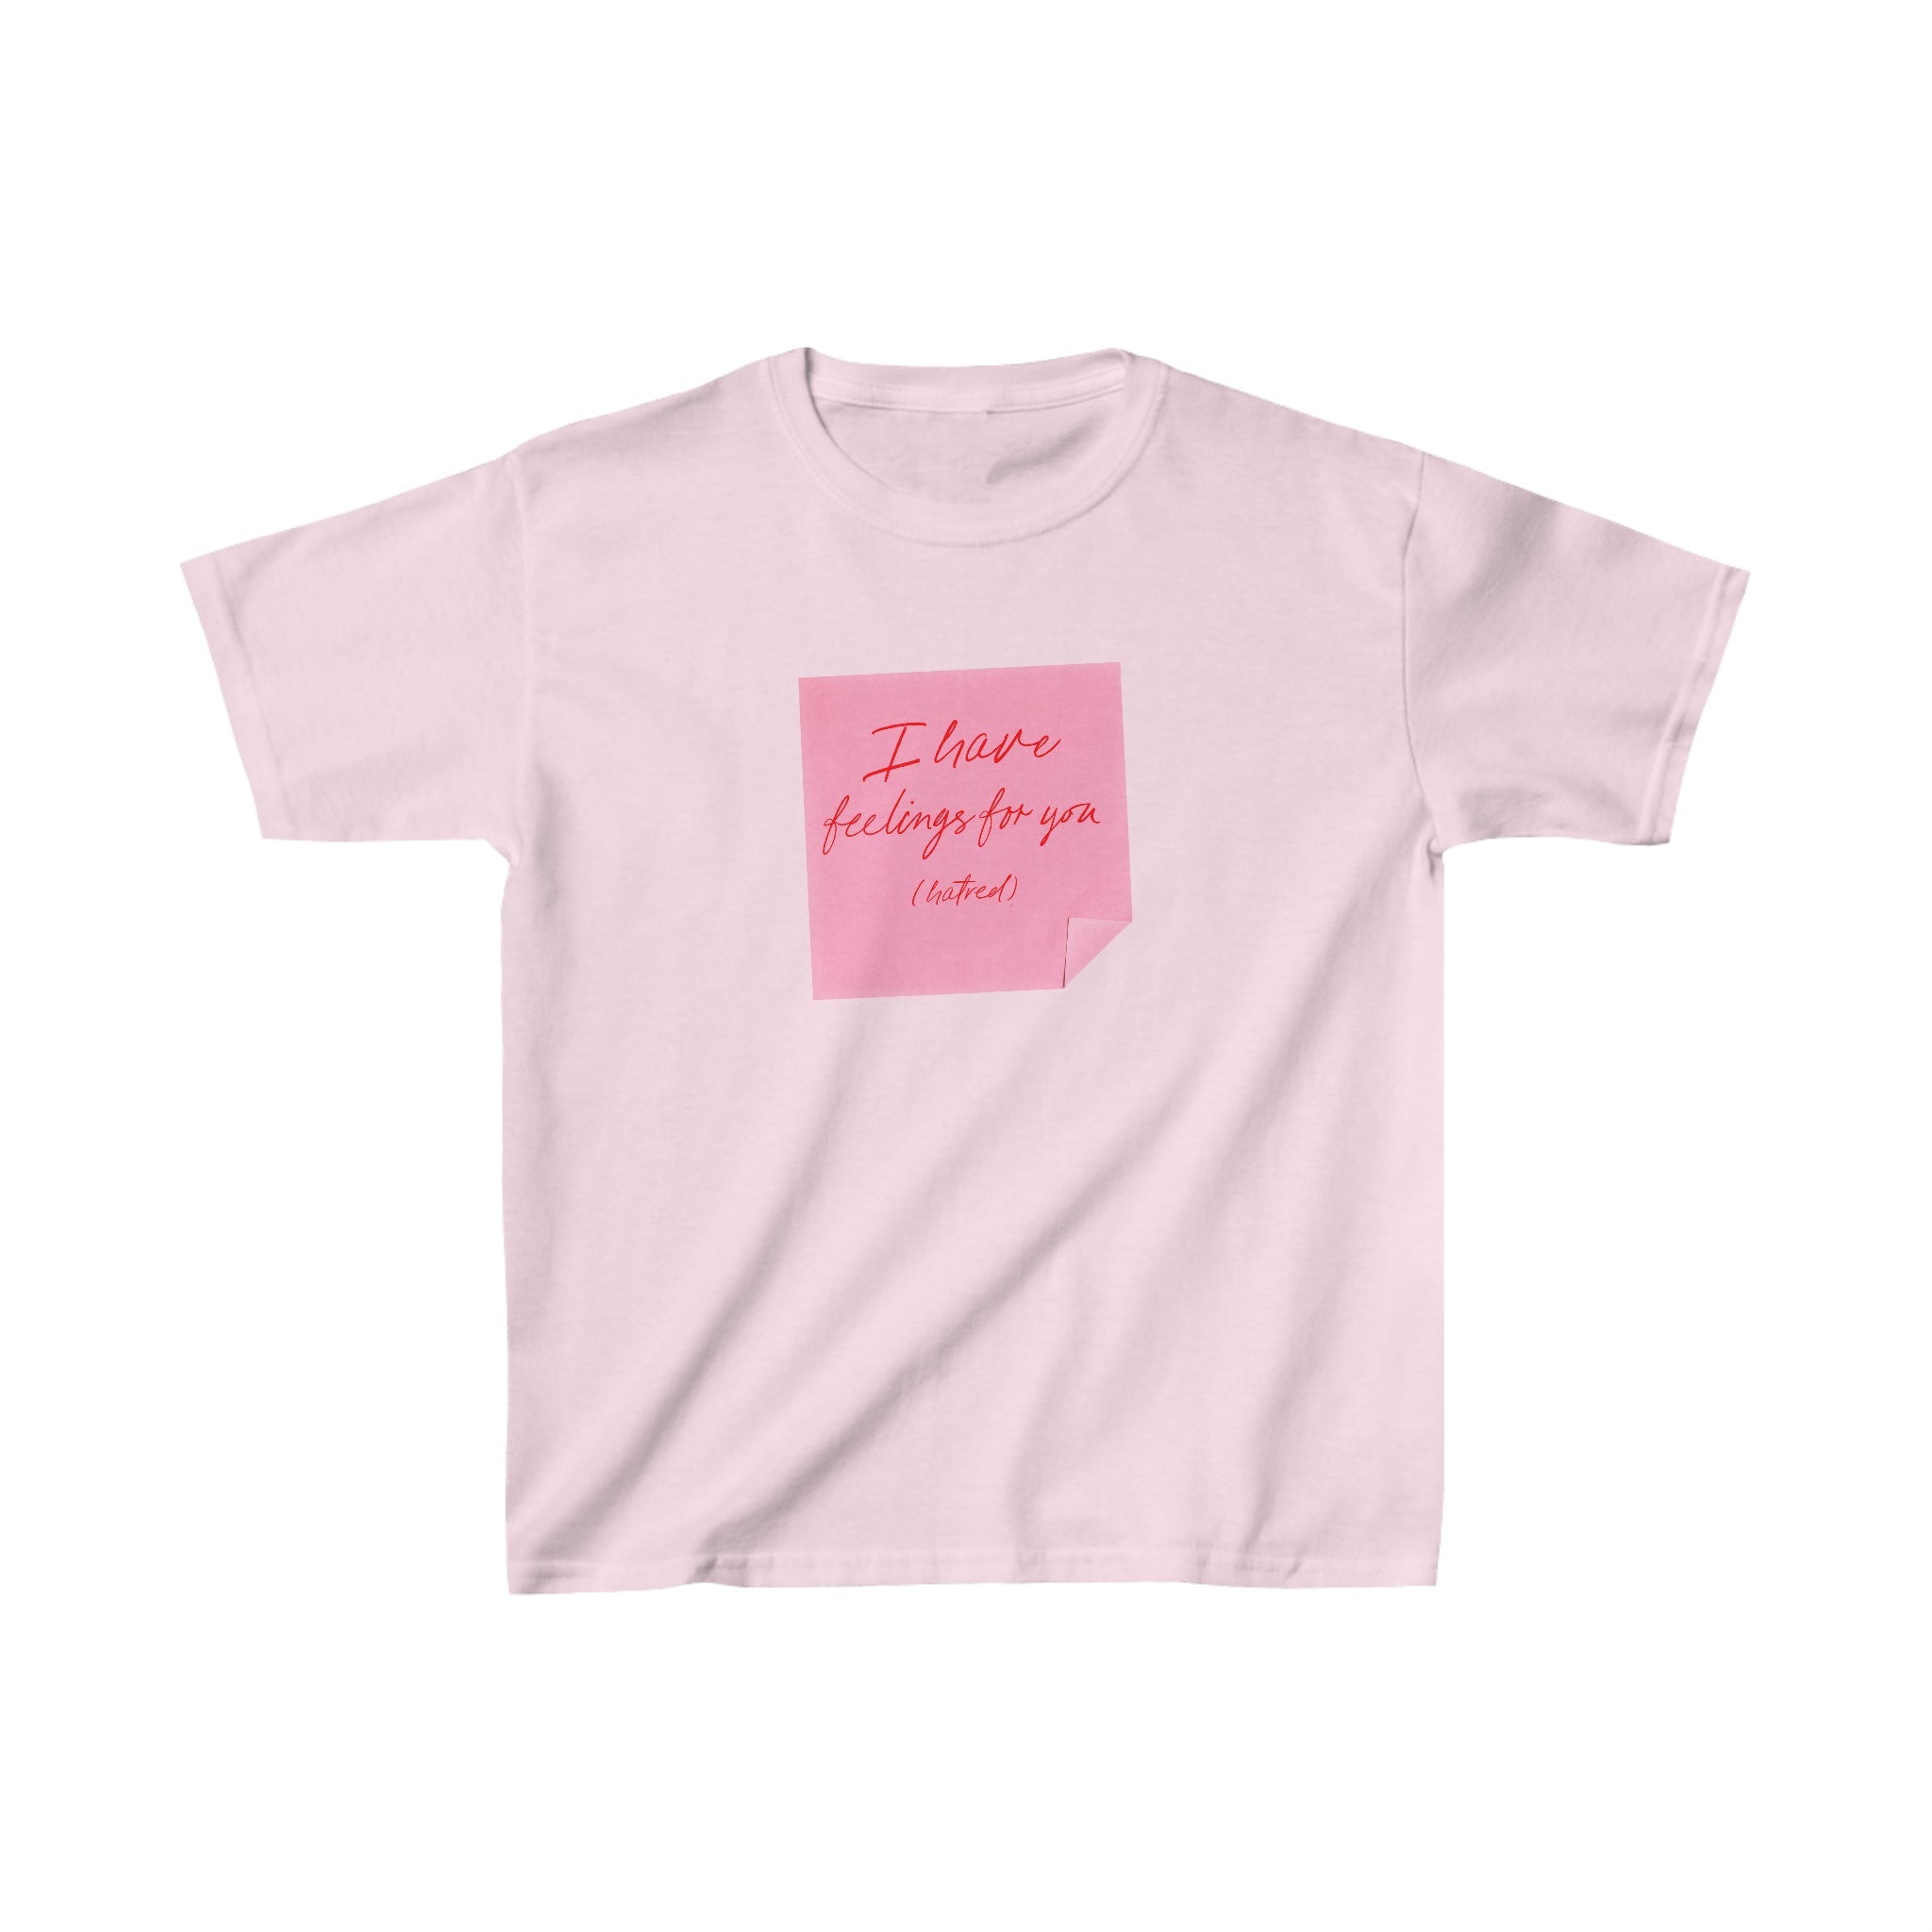 'I have feelings for you (hatred)' baby tee - In Print We Trust